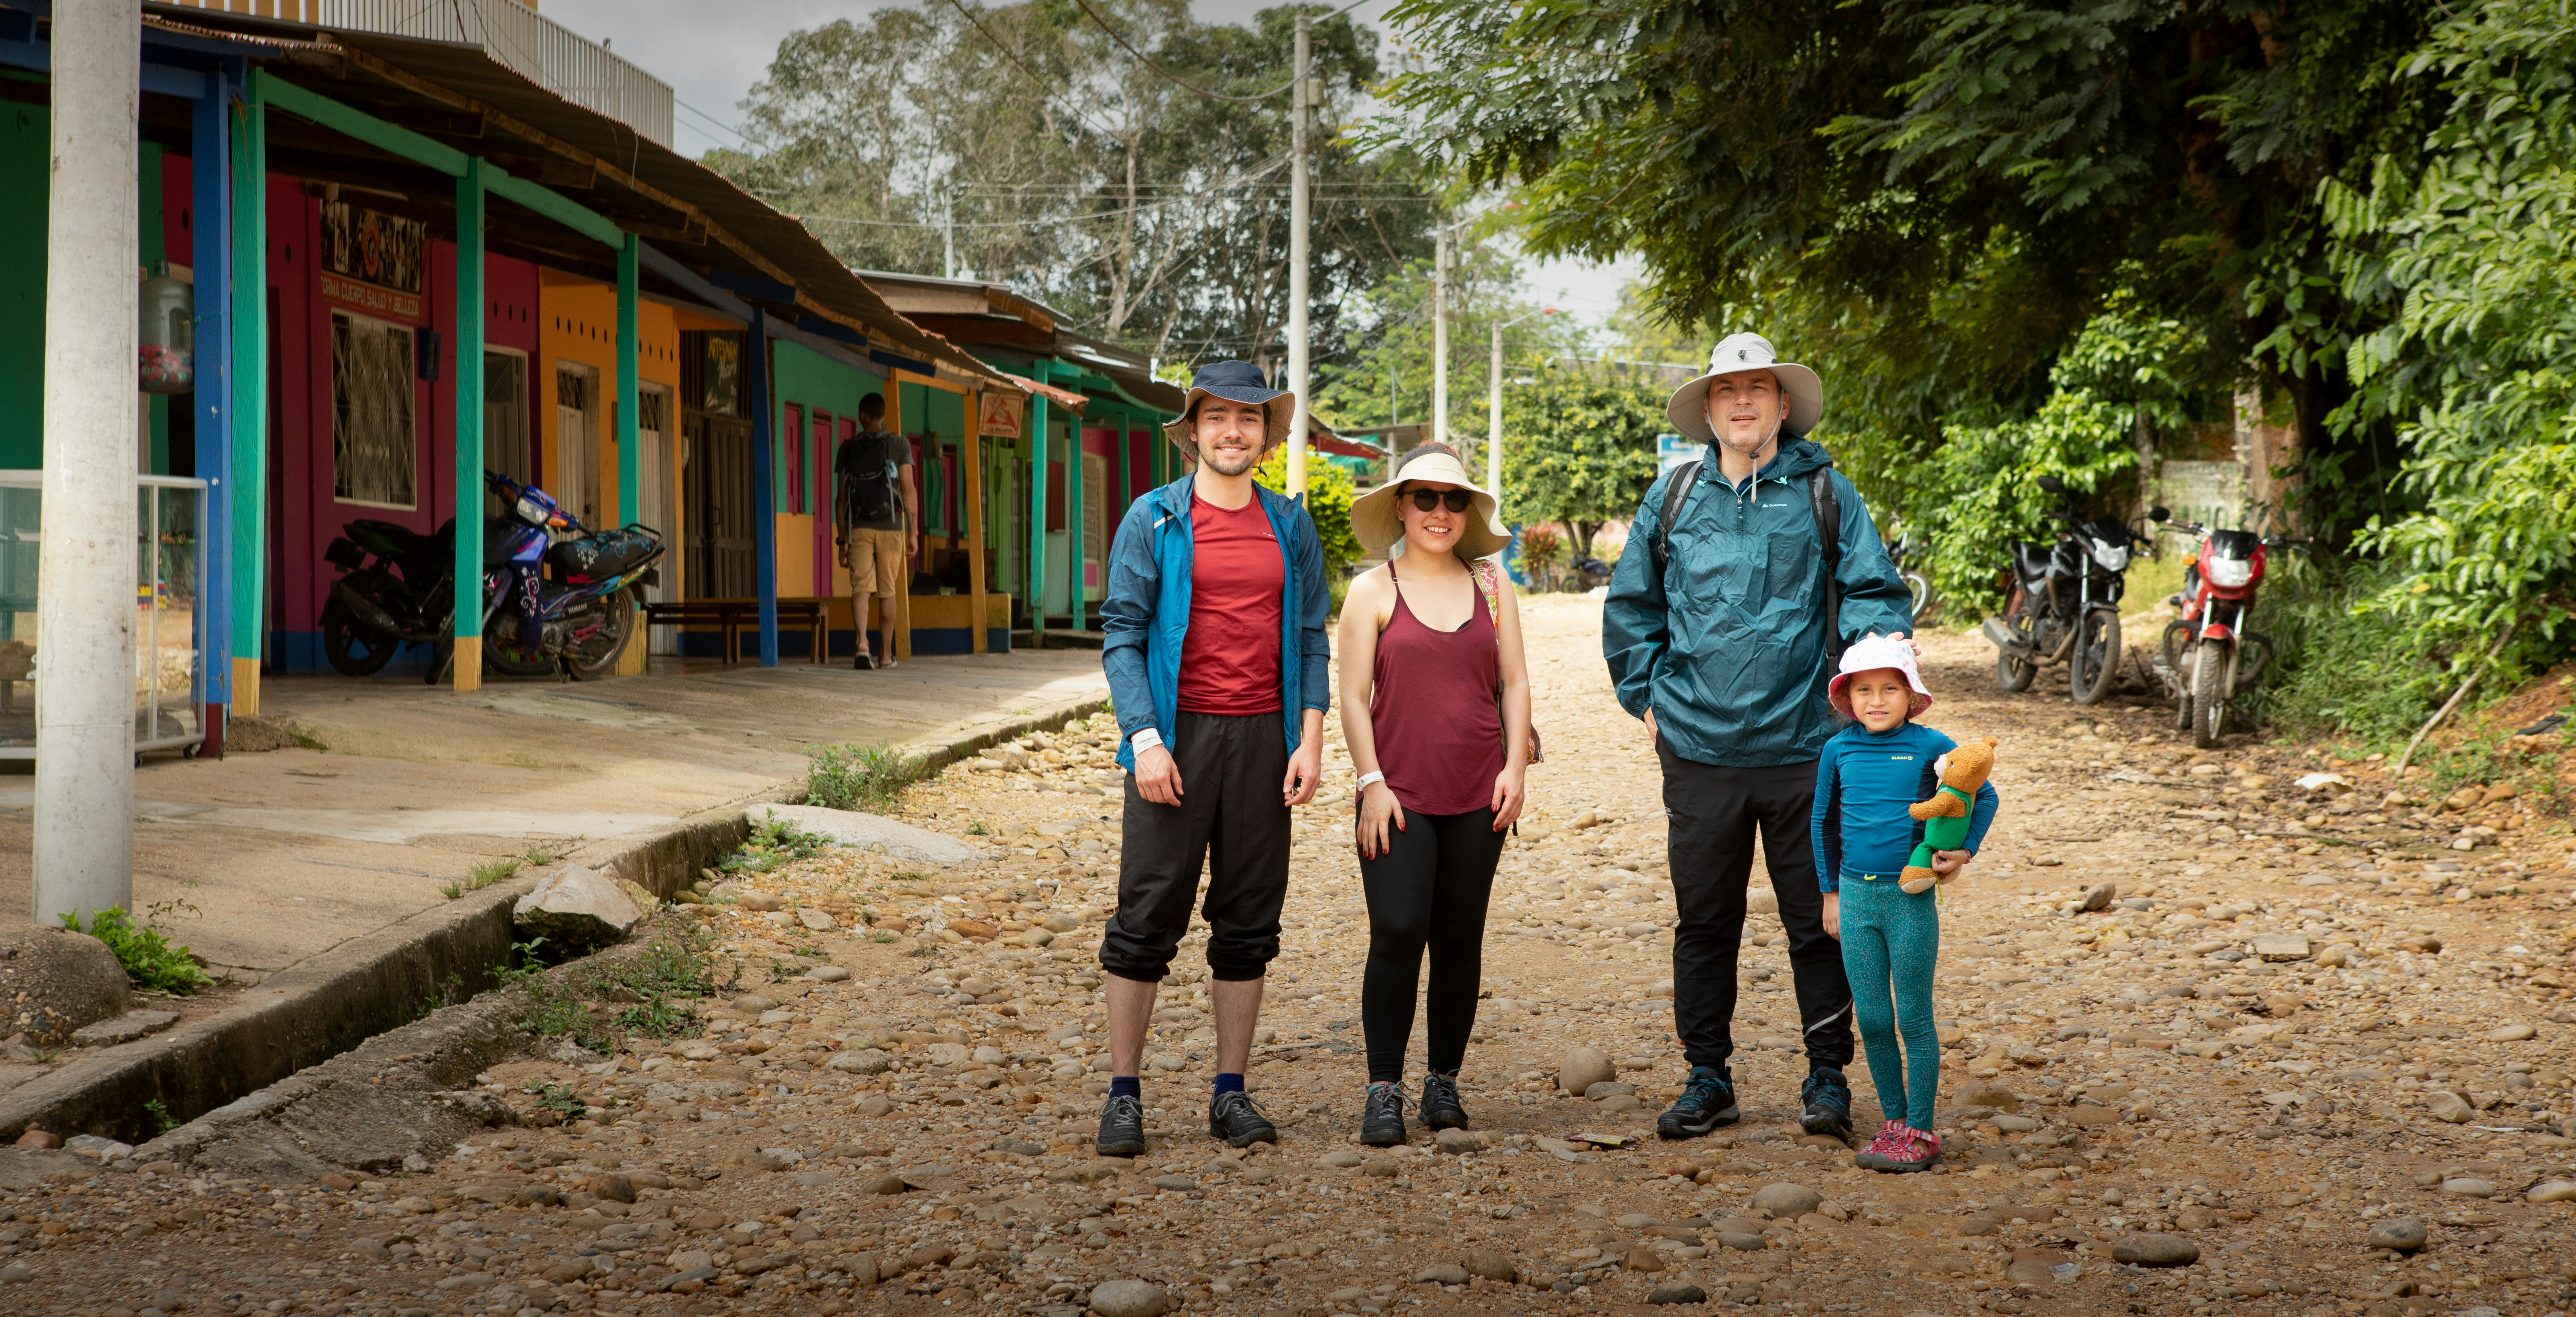 Three adults and a little girl in blue rash guards who is holding a teddy bear smile for the camera in front of a colorful row of shops and other businesses on a rocky dirt road in Colombia